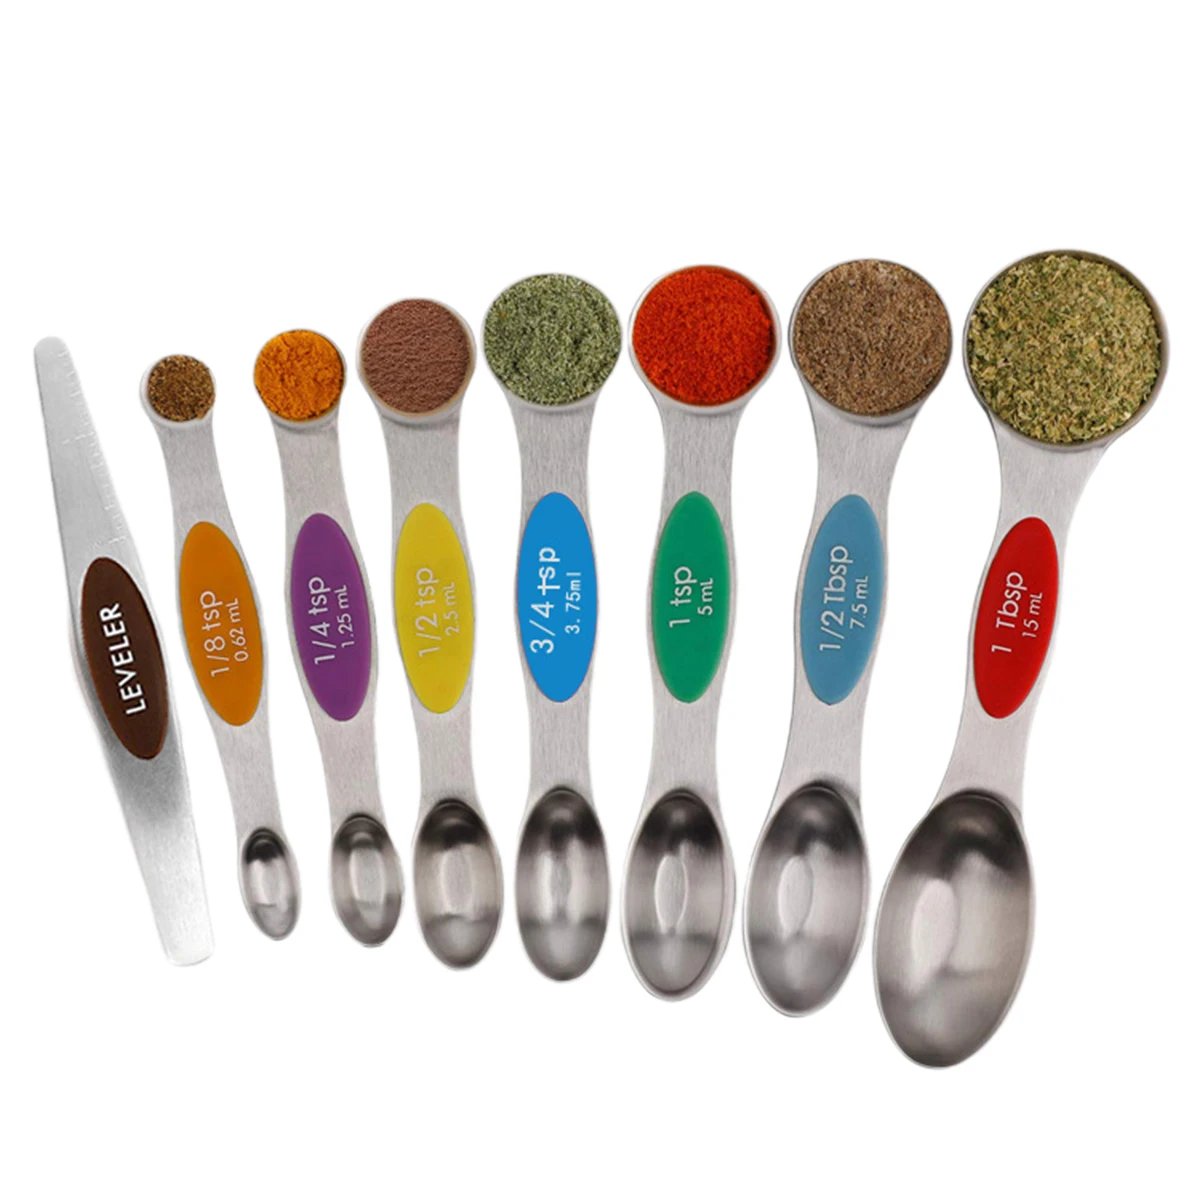 https://ae01.alicdn.com/kf/Ha24e96a1ee88410eadf1dba90f366302N/Spring-Chef-Magnetic-Measuring-Spoons-Set-of-8-Pieces-Dual-Sided-Stainless-Steel-Tools-Fits-in.jpg